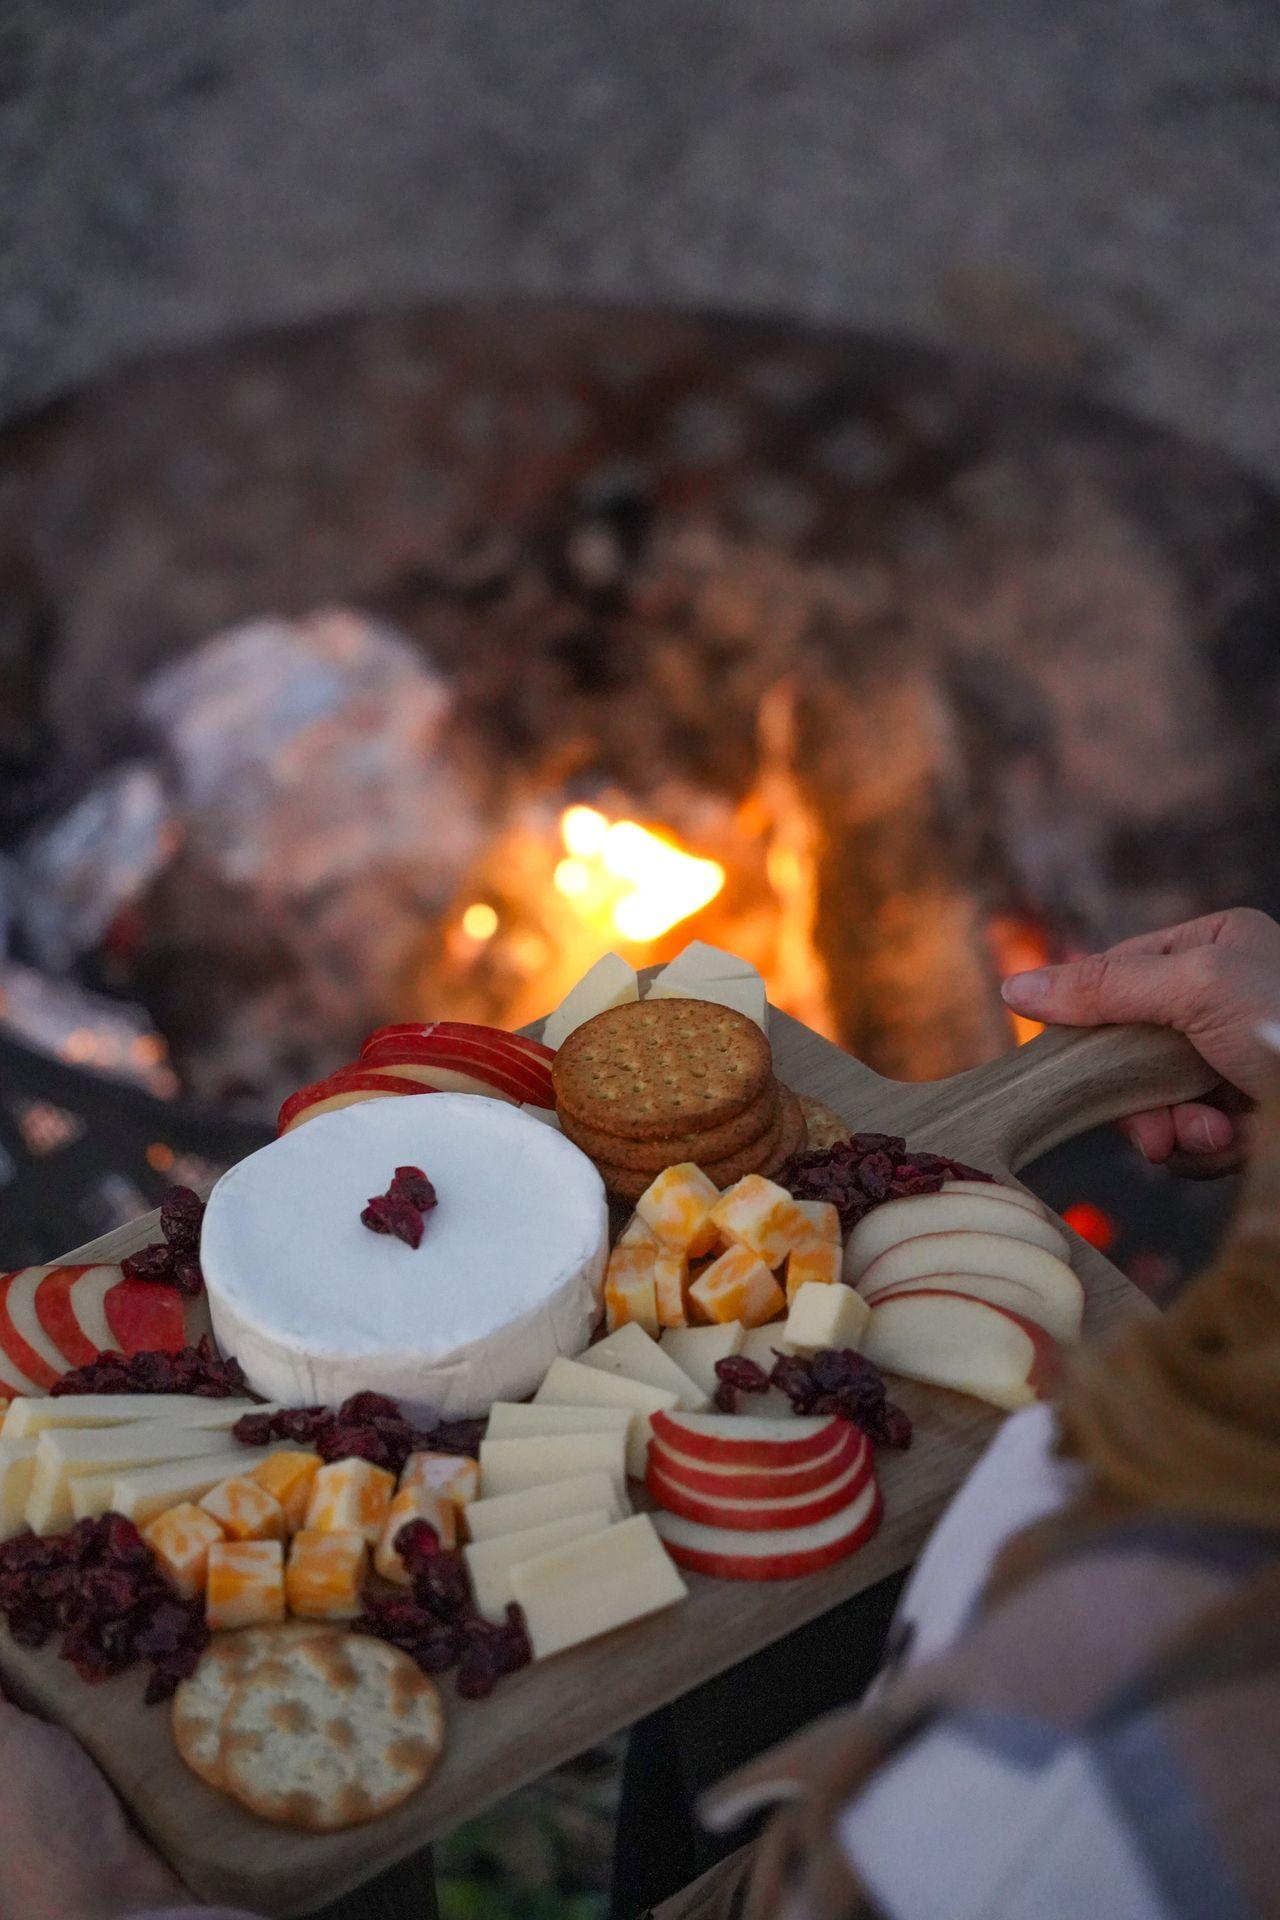 Holding up a charcuterie board next to a campfire. The board has 3 cheeses, crackers, apple slices and dried cranberries.